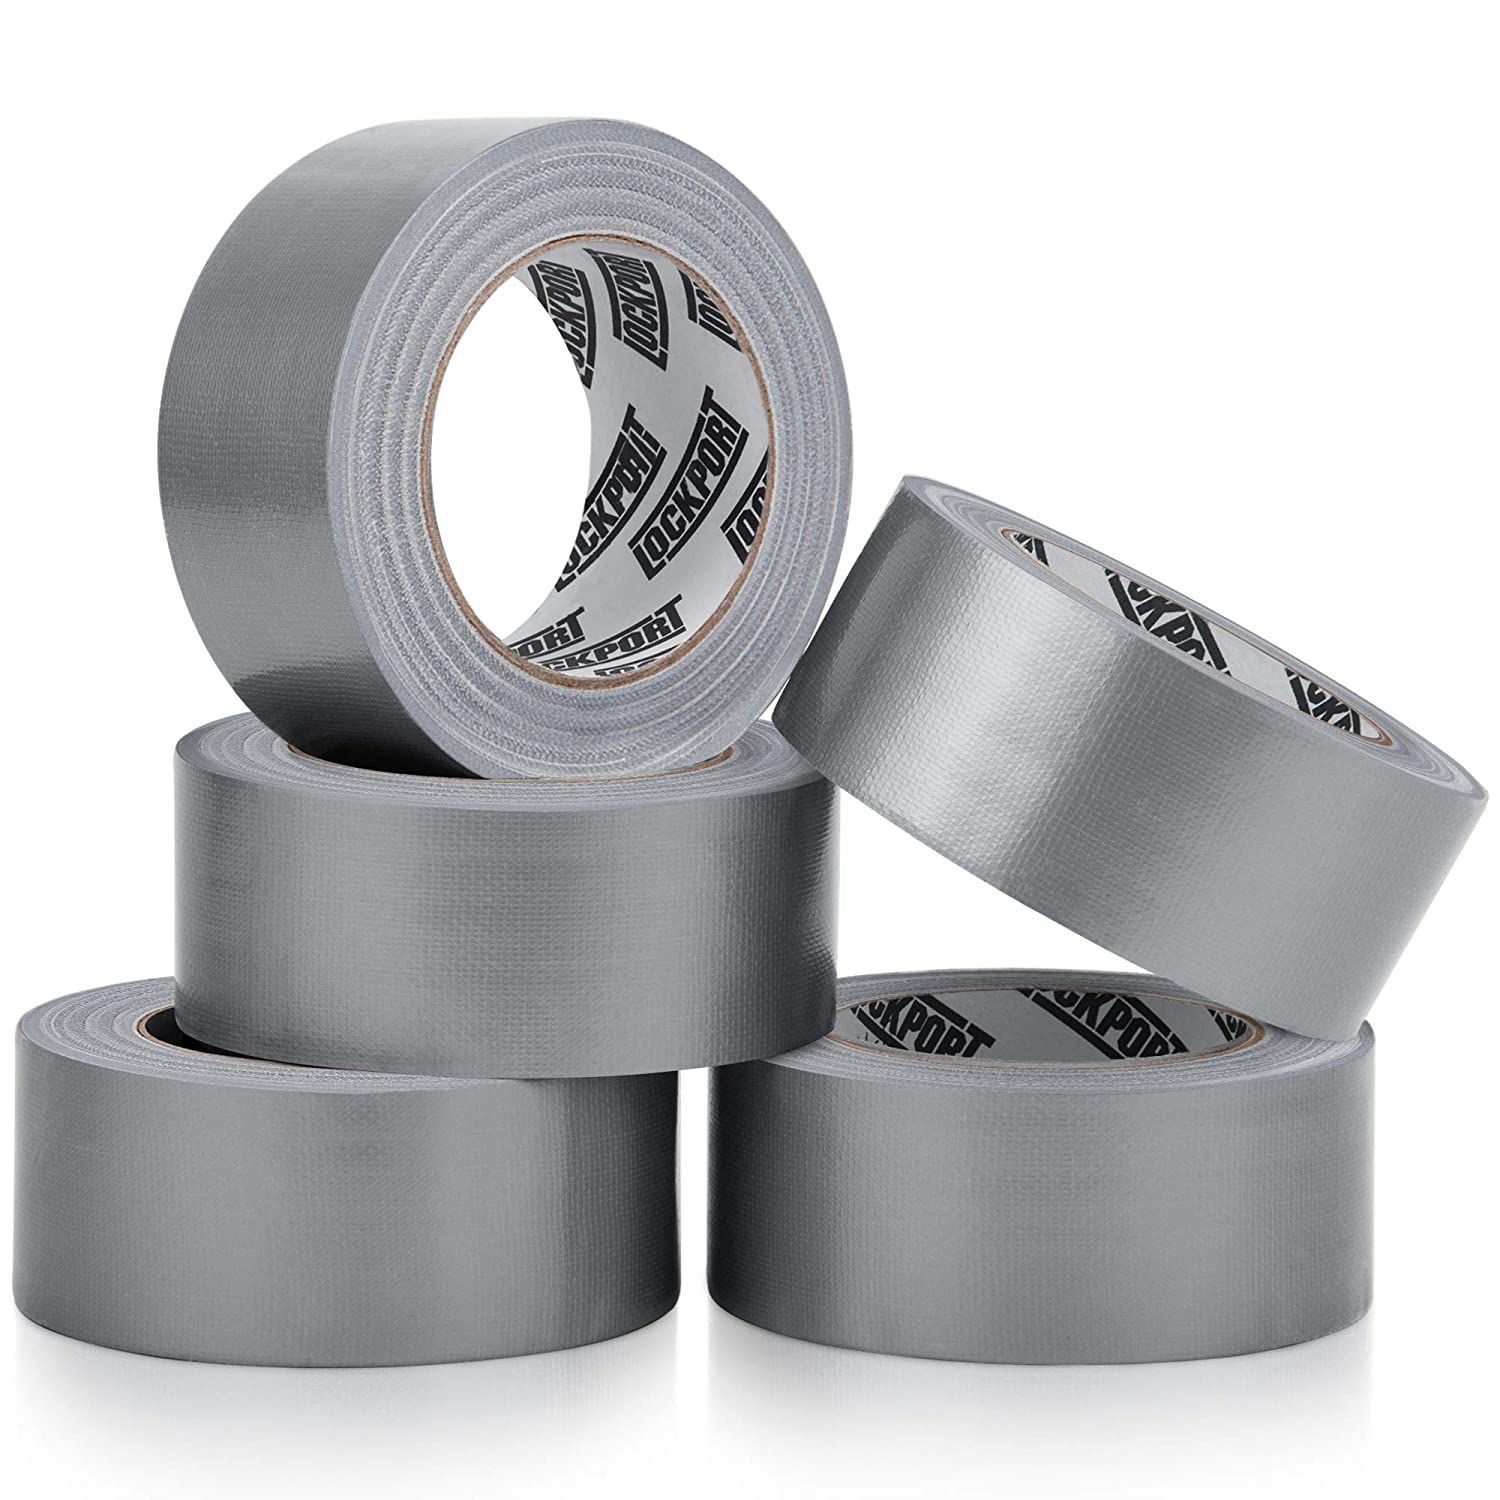 Duct Tape,Heavy Duty Duct Tape, 1.88 In Wide 35 Yards, Waterproof Tape,  Multi-Purpose Tape,Strong, Flexible, Tear by Hand ,No Residue for Home  Repair